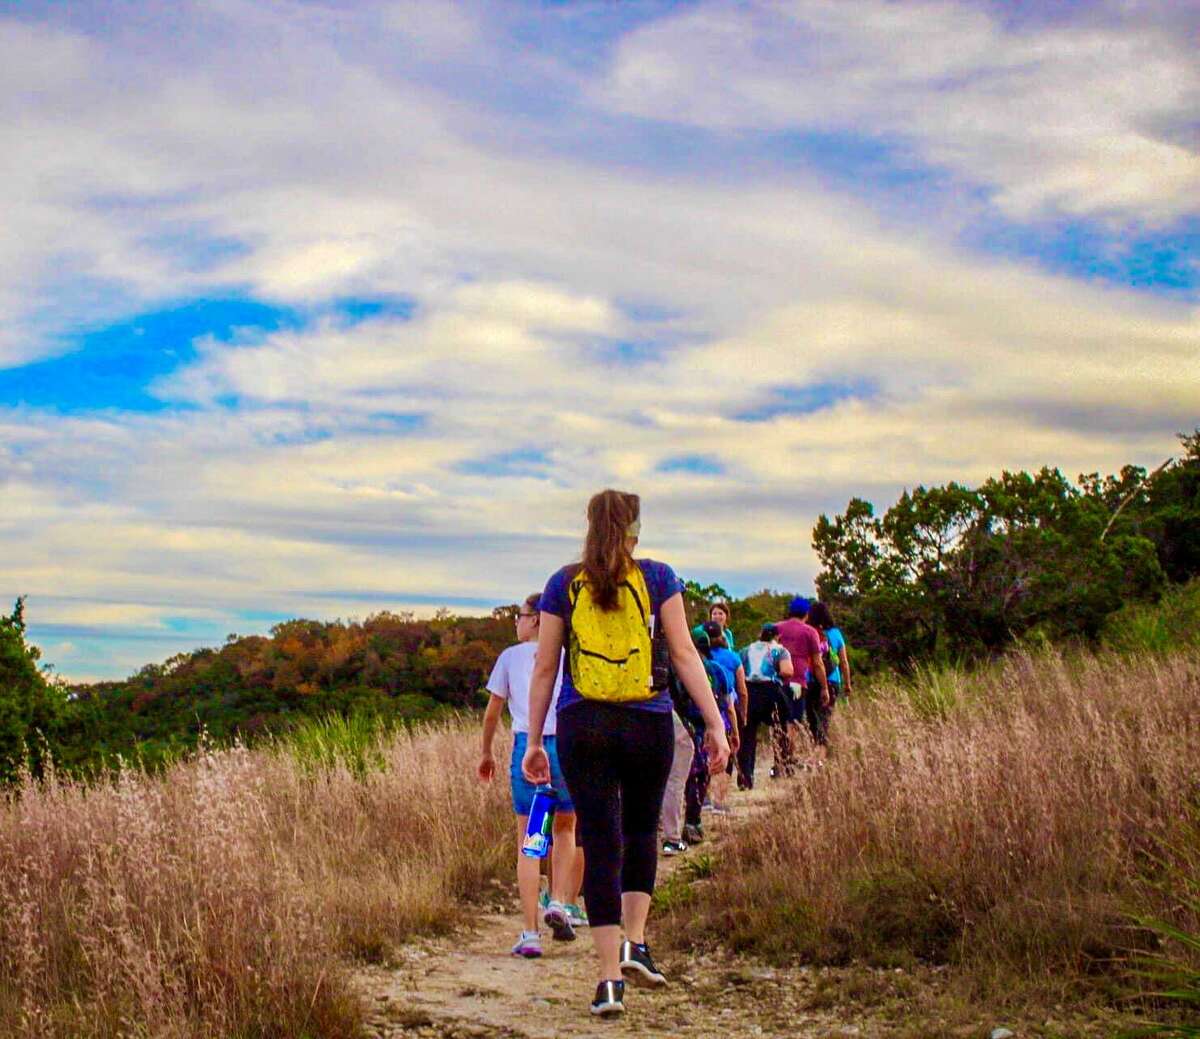 Members of the Girls Who Hike TX group hike in Friedrich Wilderness Park. Women-only hiking groups provide a safe space where women can enjoy themselves without being judged by men.